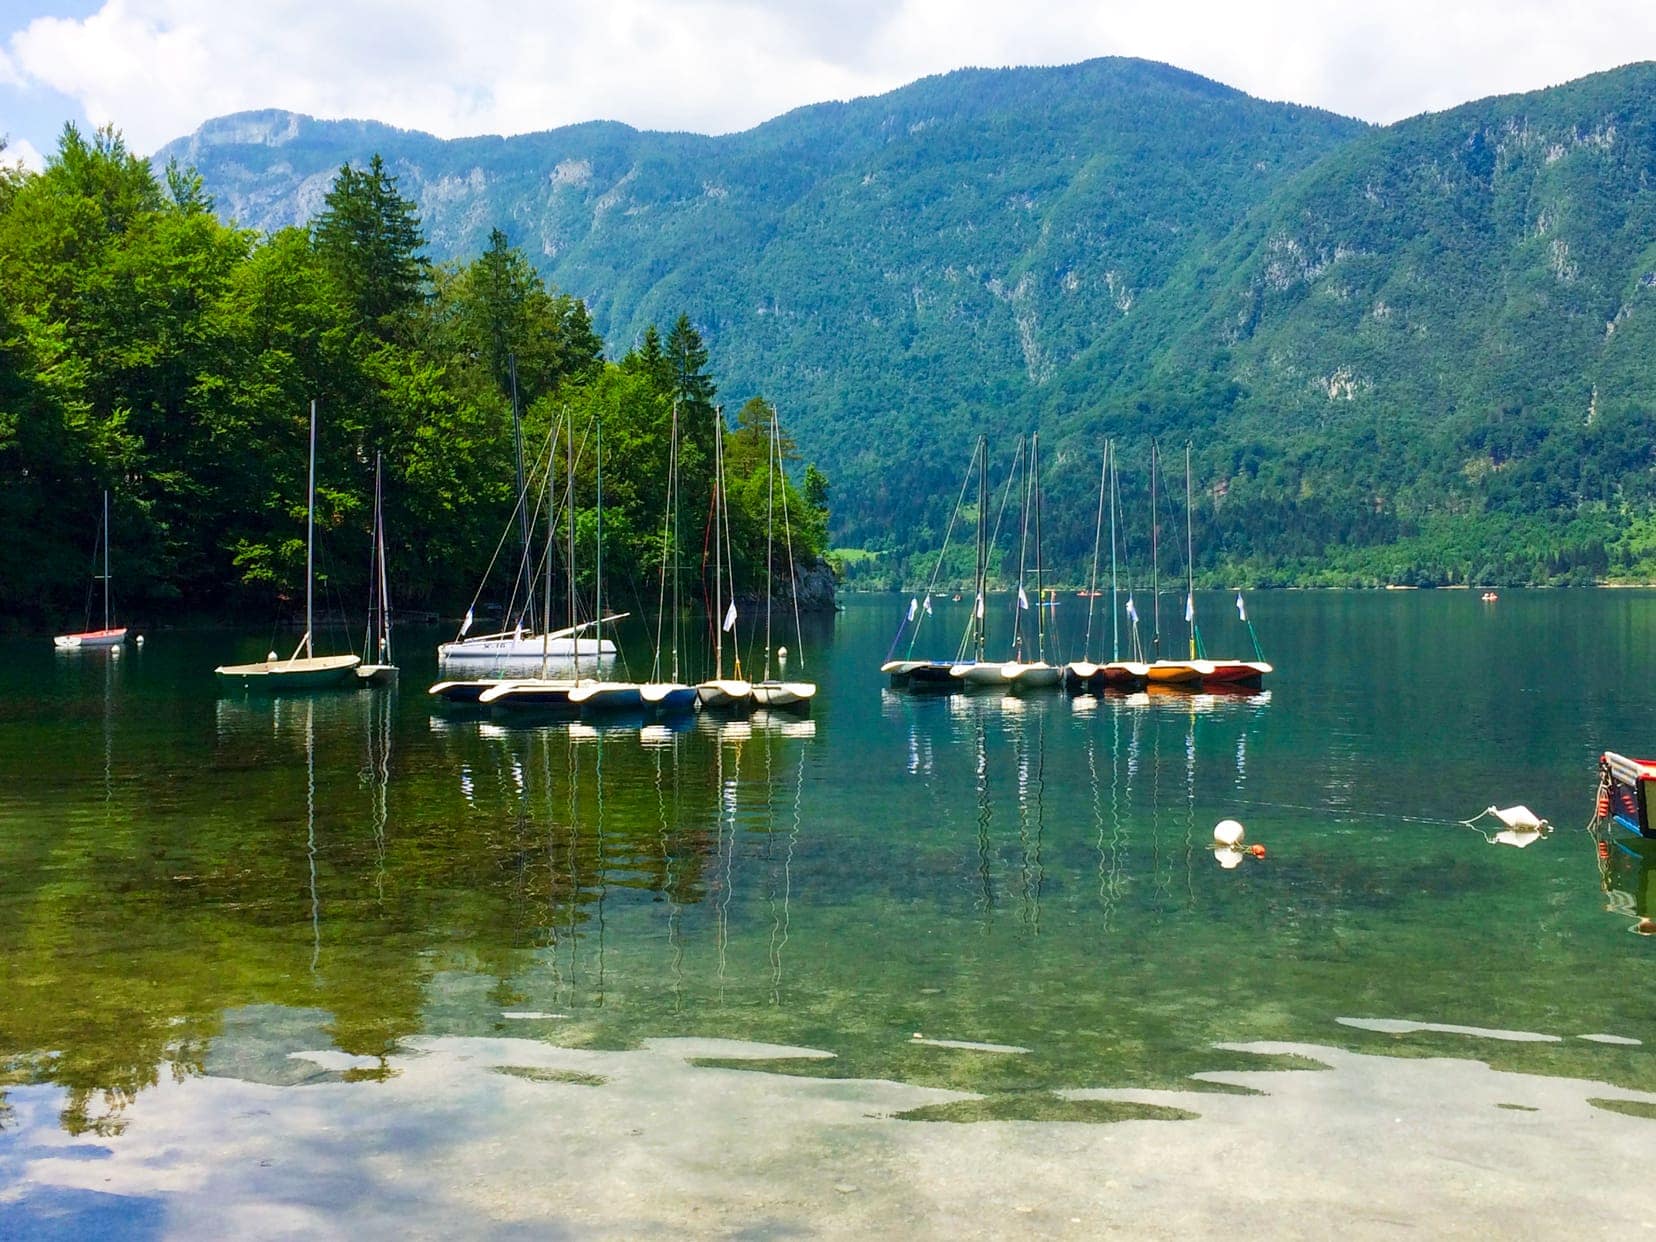 Lake Bohinje with a few small boats on teh blue green water